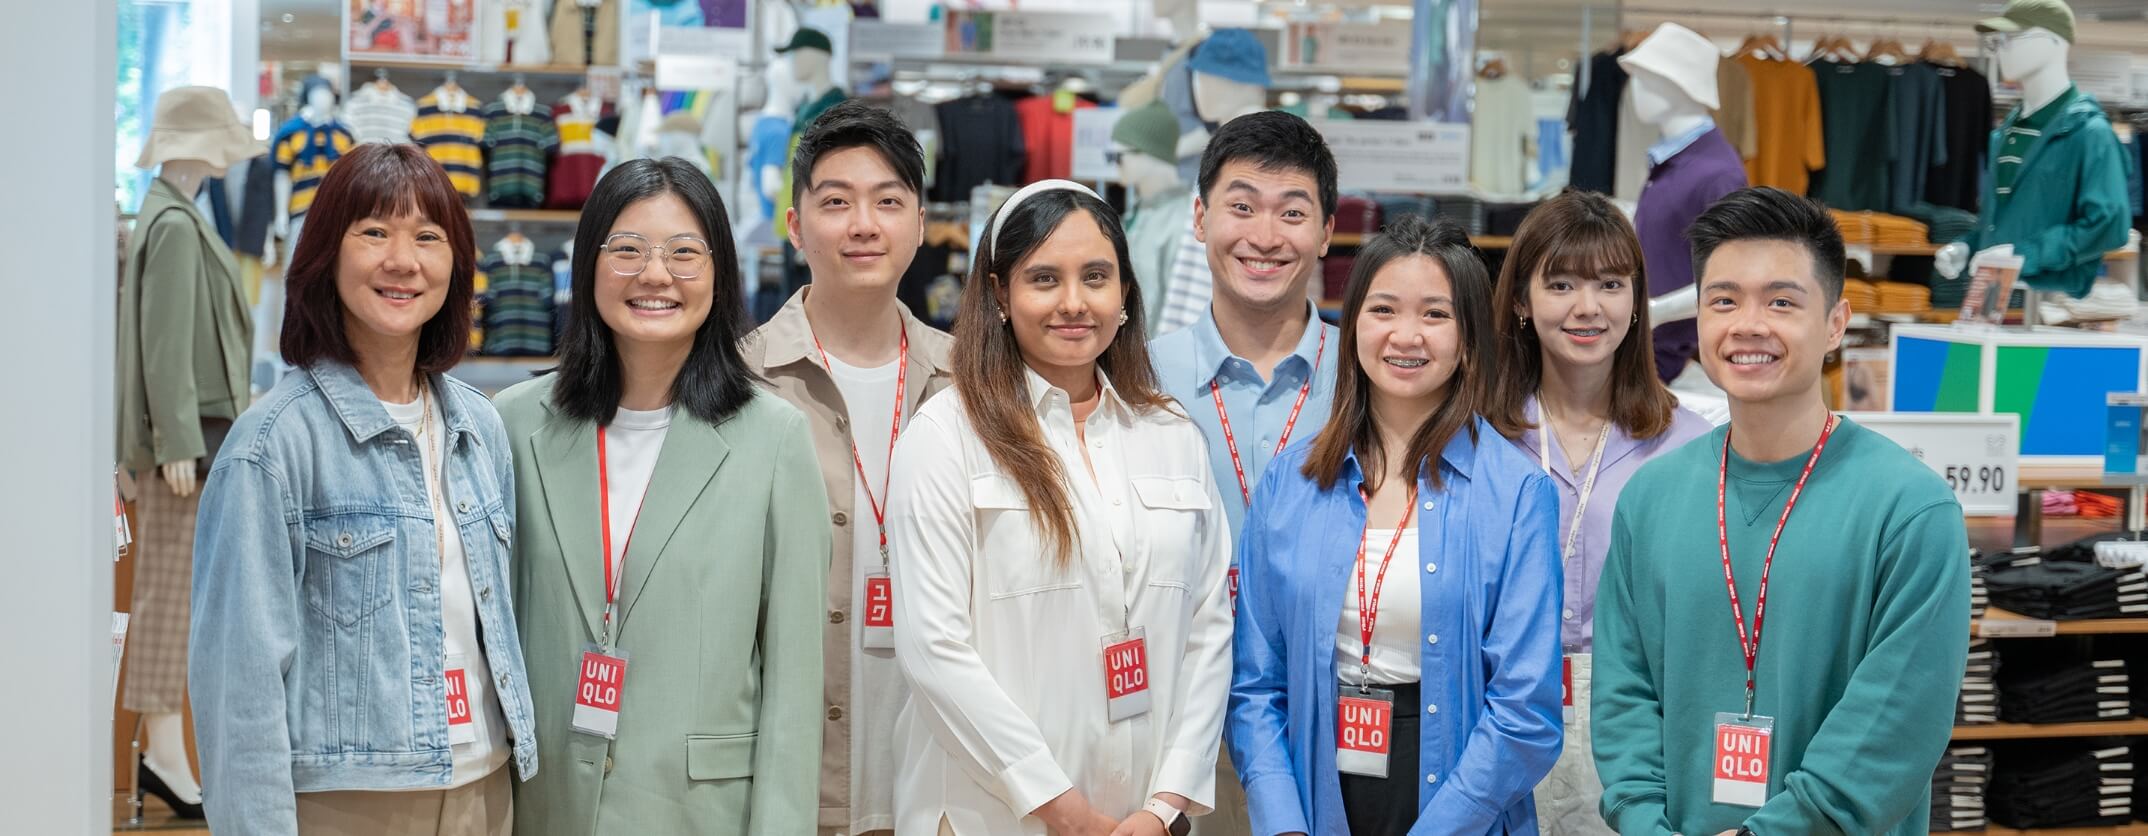 Singapore store to aid Uniqlos Southeast Asia ambitions  Inspiring  Business News Stories from Asia